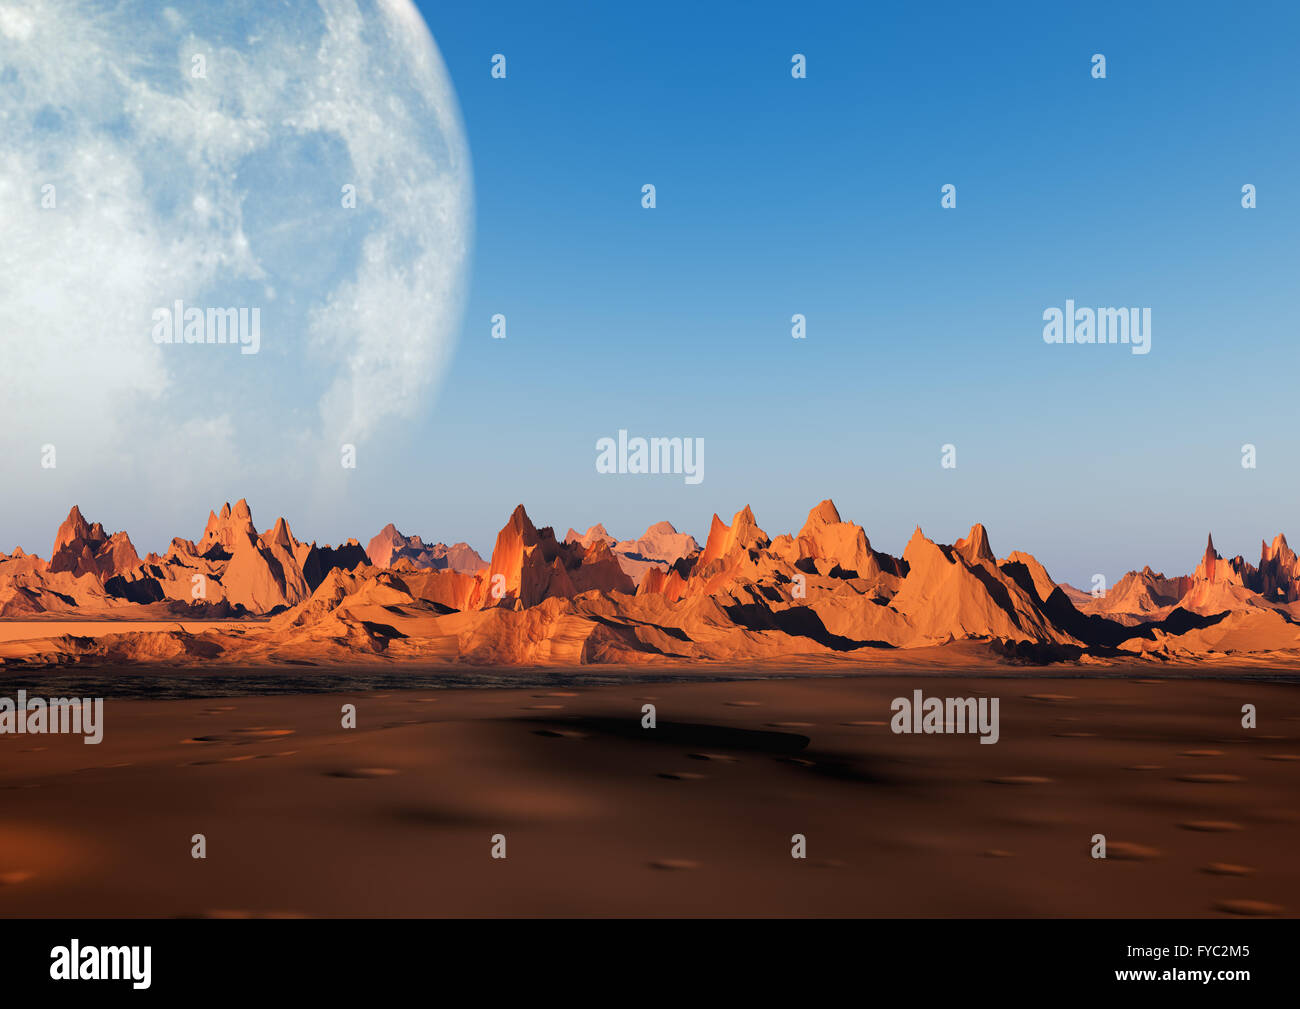 3D illustration of mountain landscape with big moon on background Stock Photo